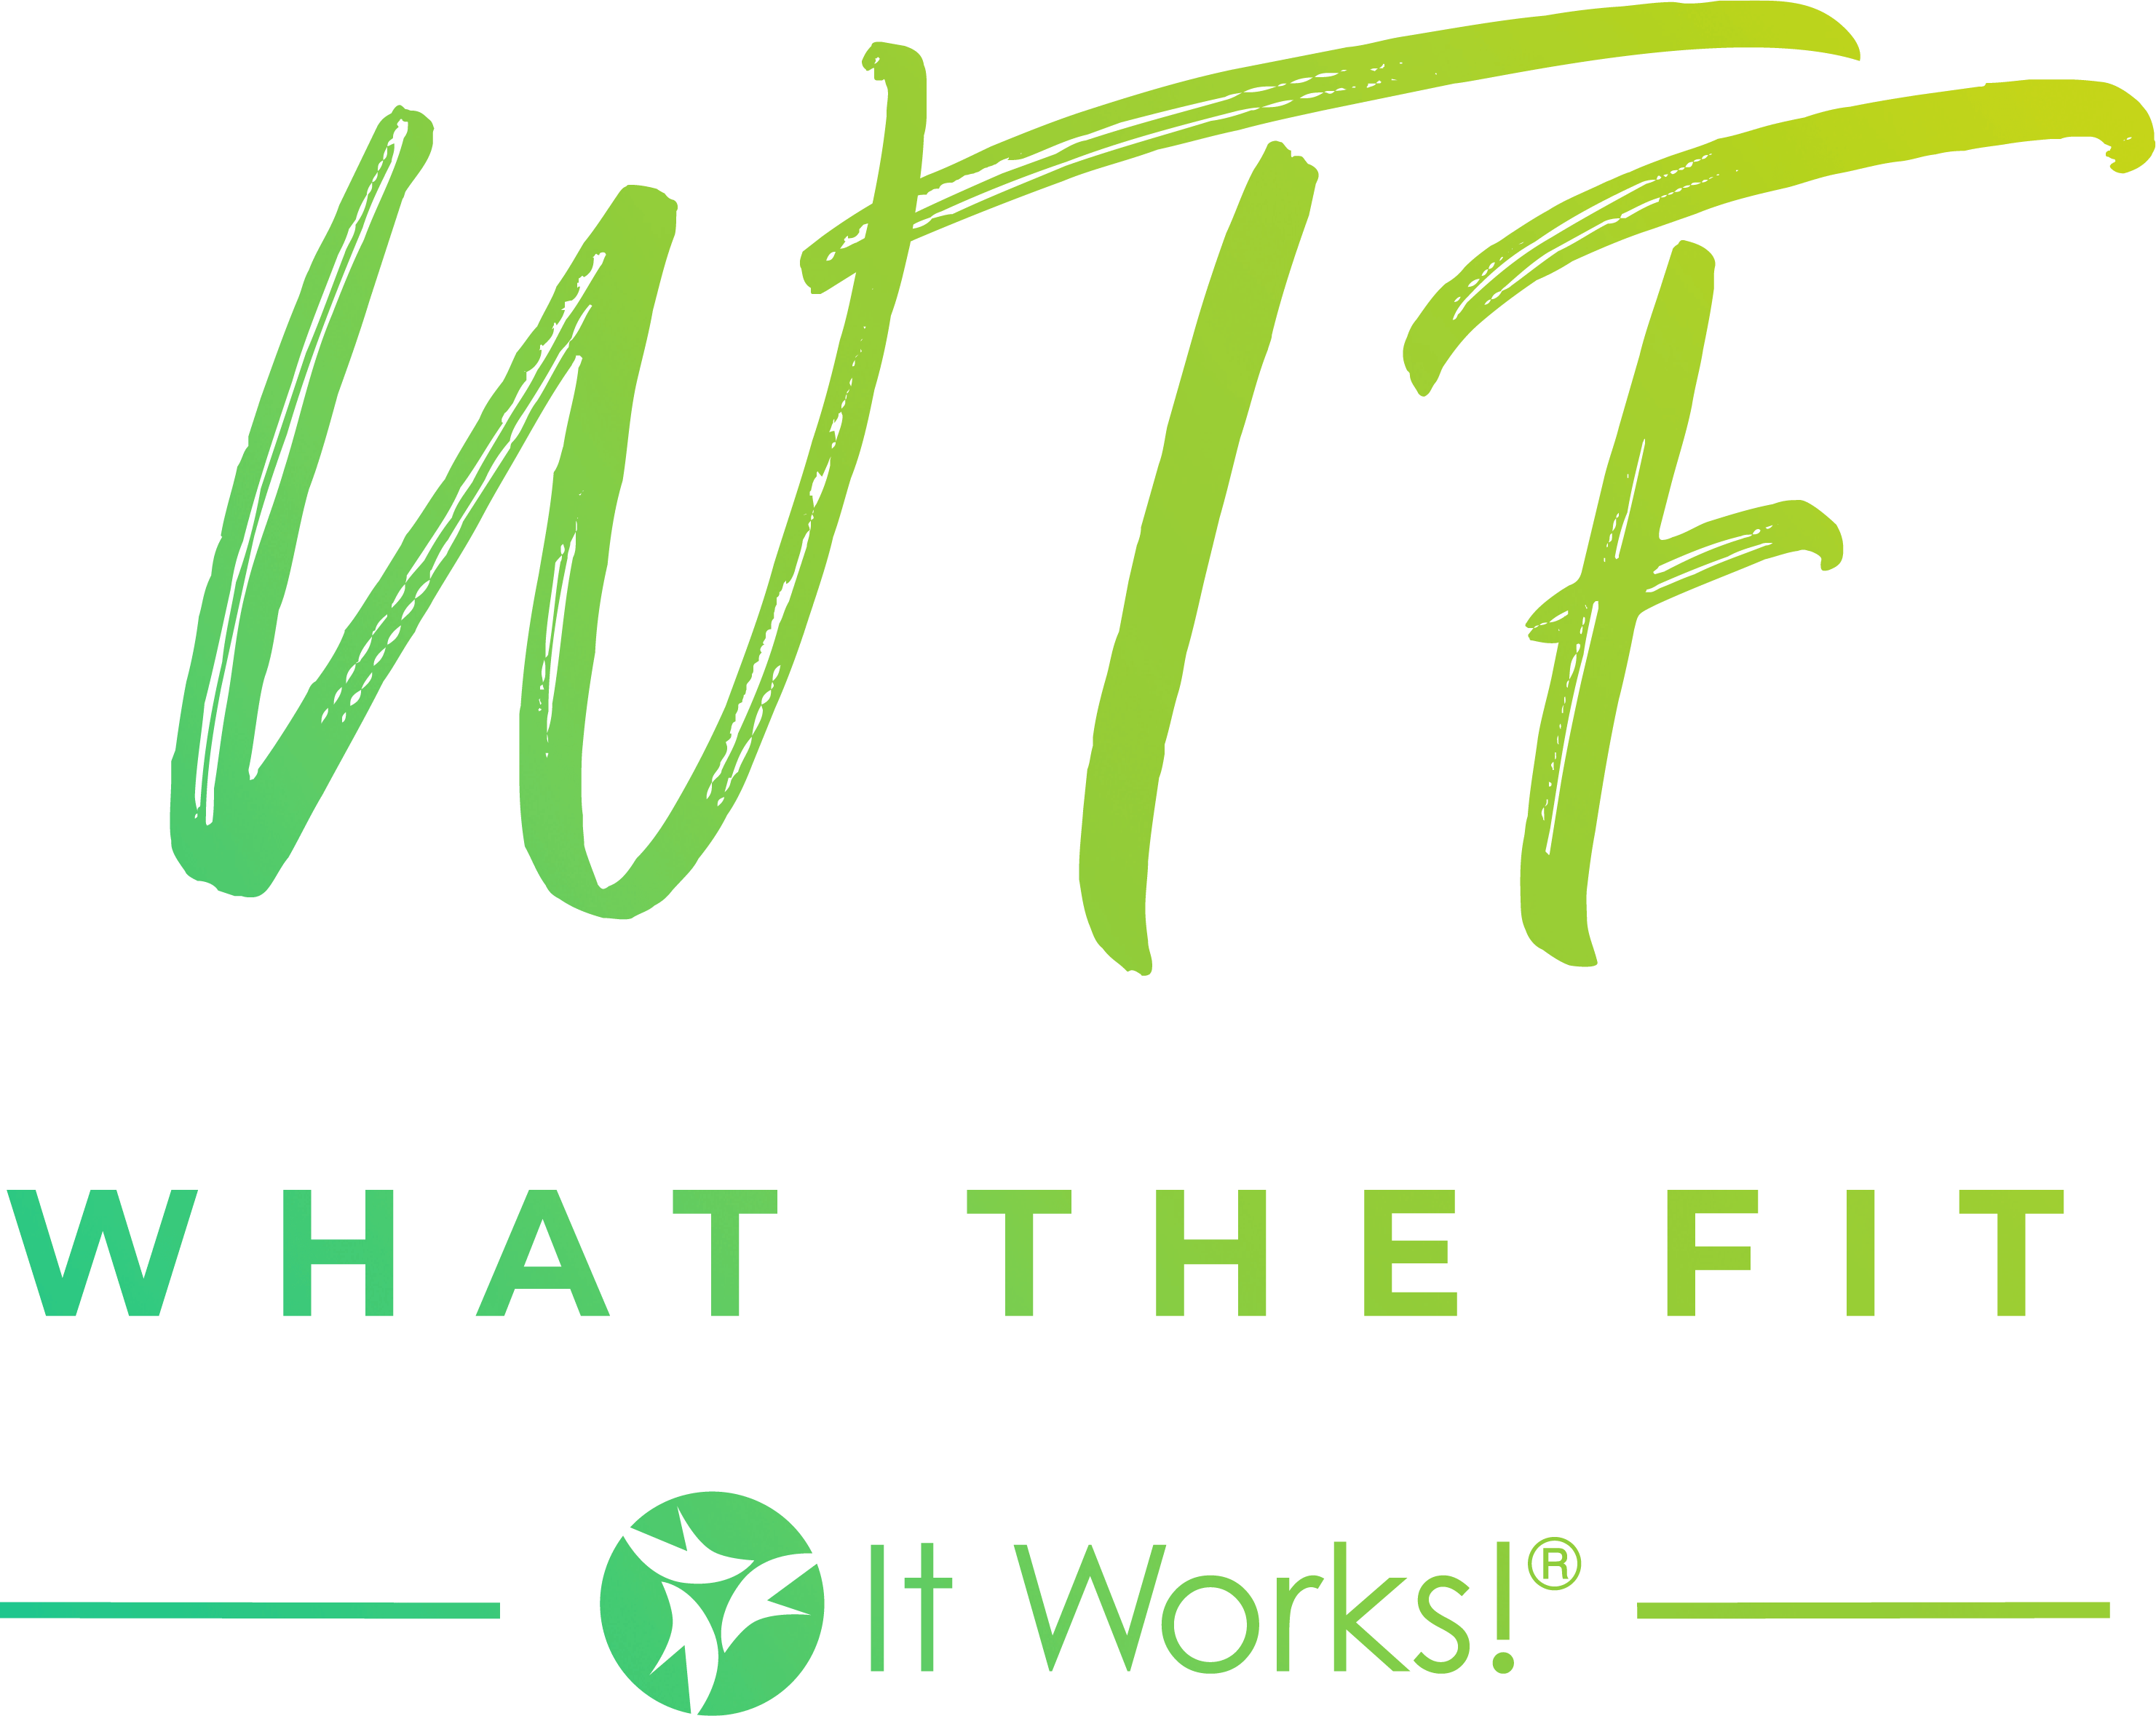 ItWorks Logo - What The Fit? | It Works!